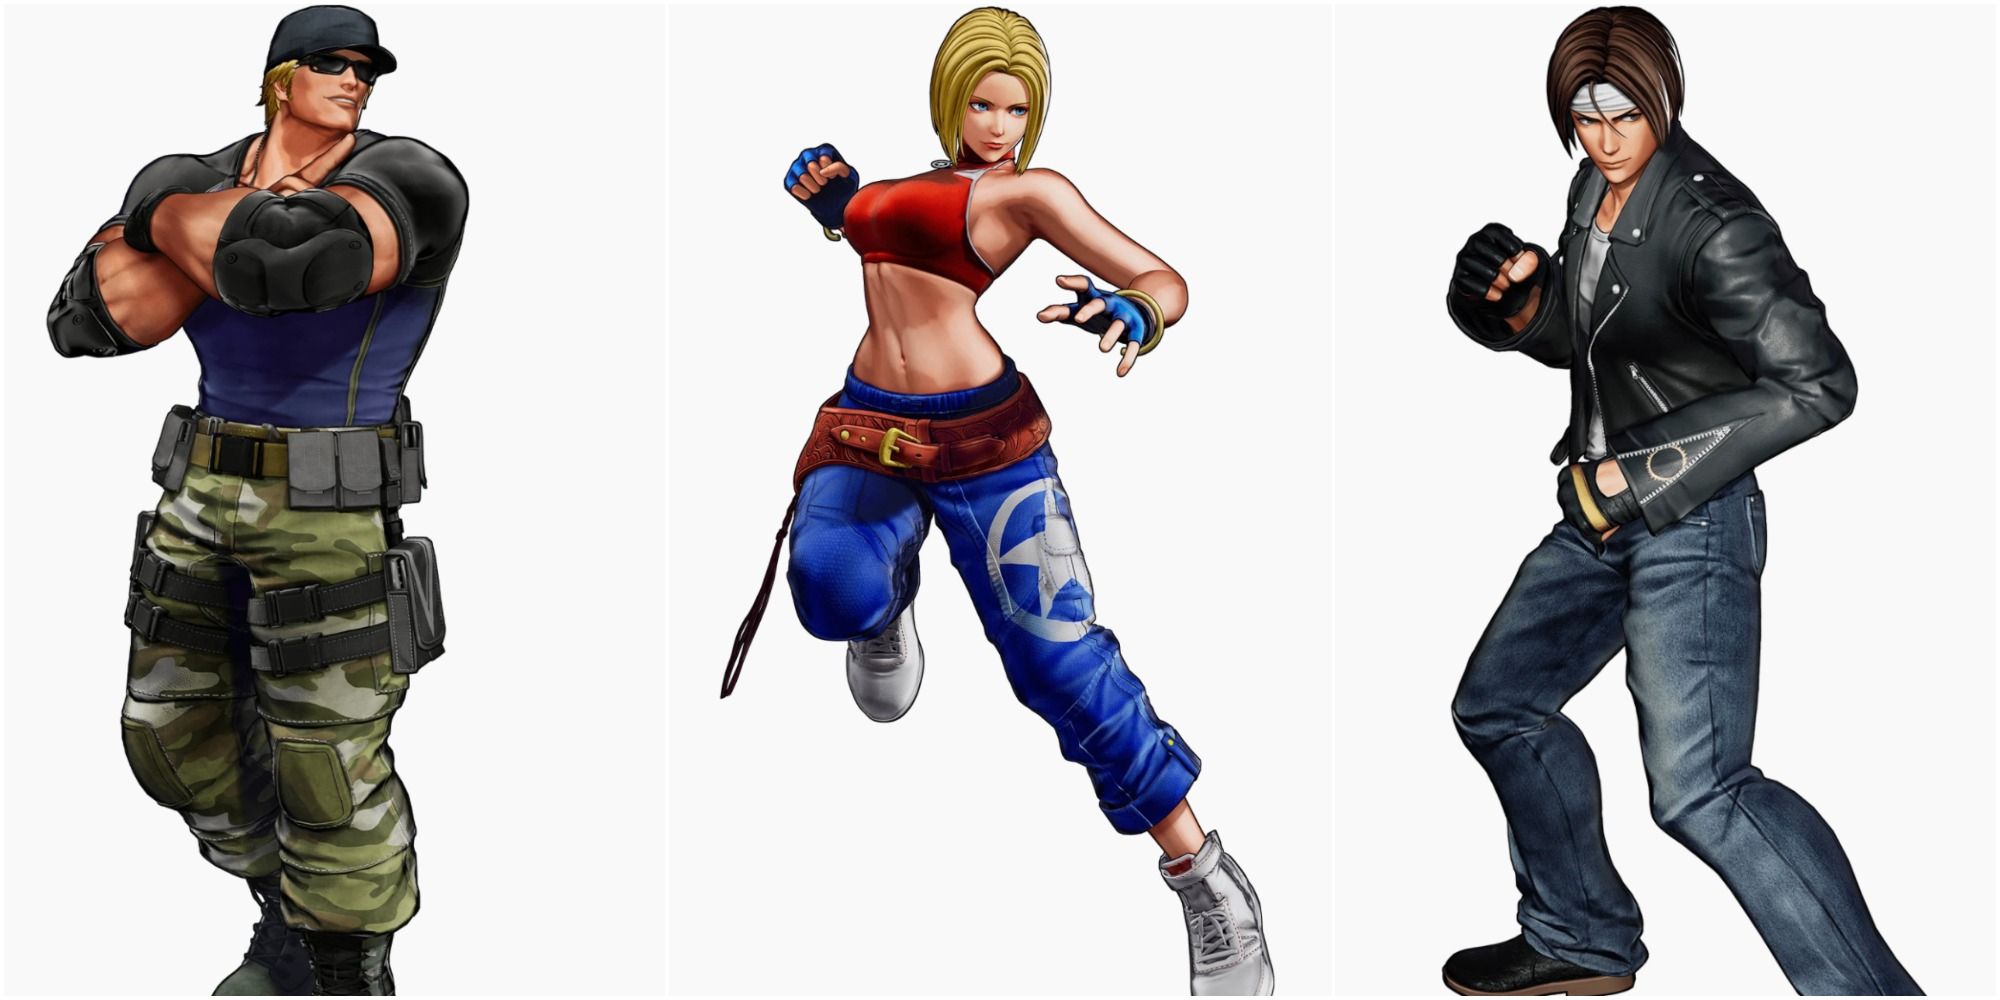 Clark Still, Blue Mary and Kyo Kusanagi from the King Of Fighters series